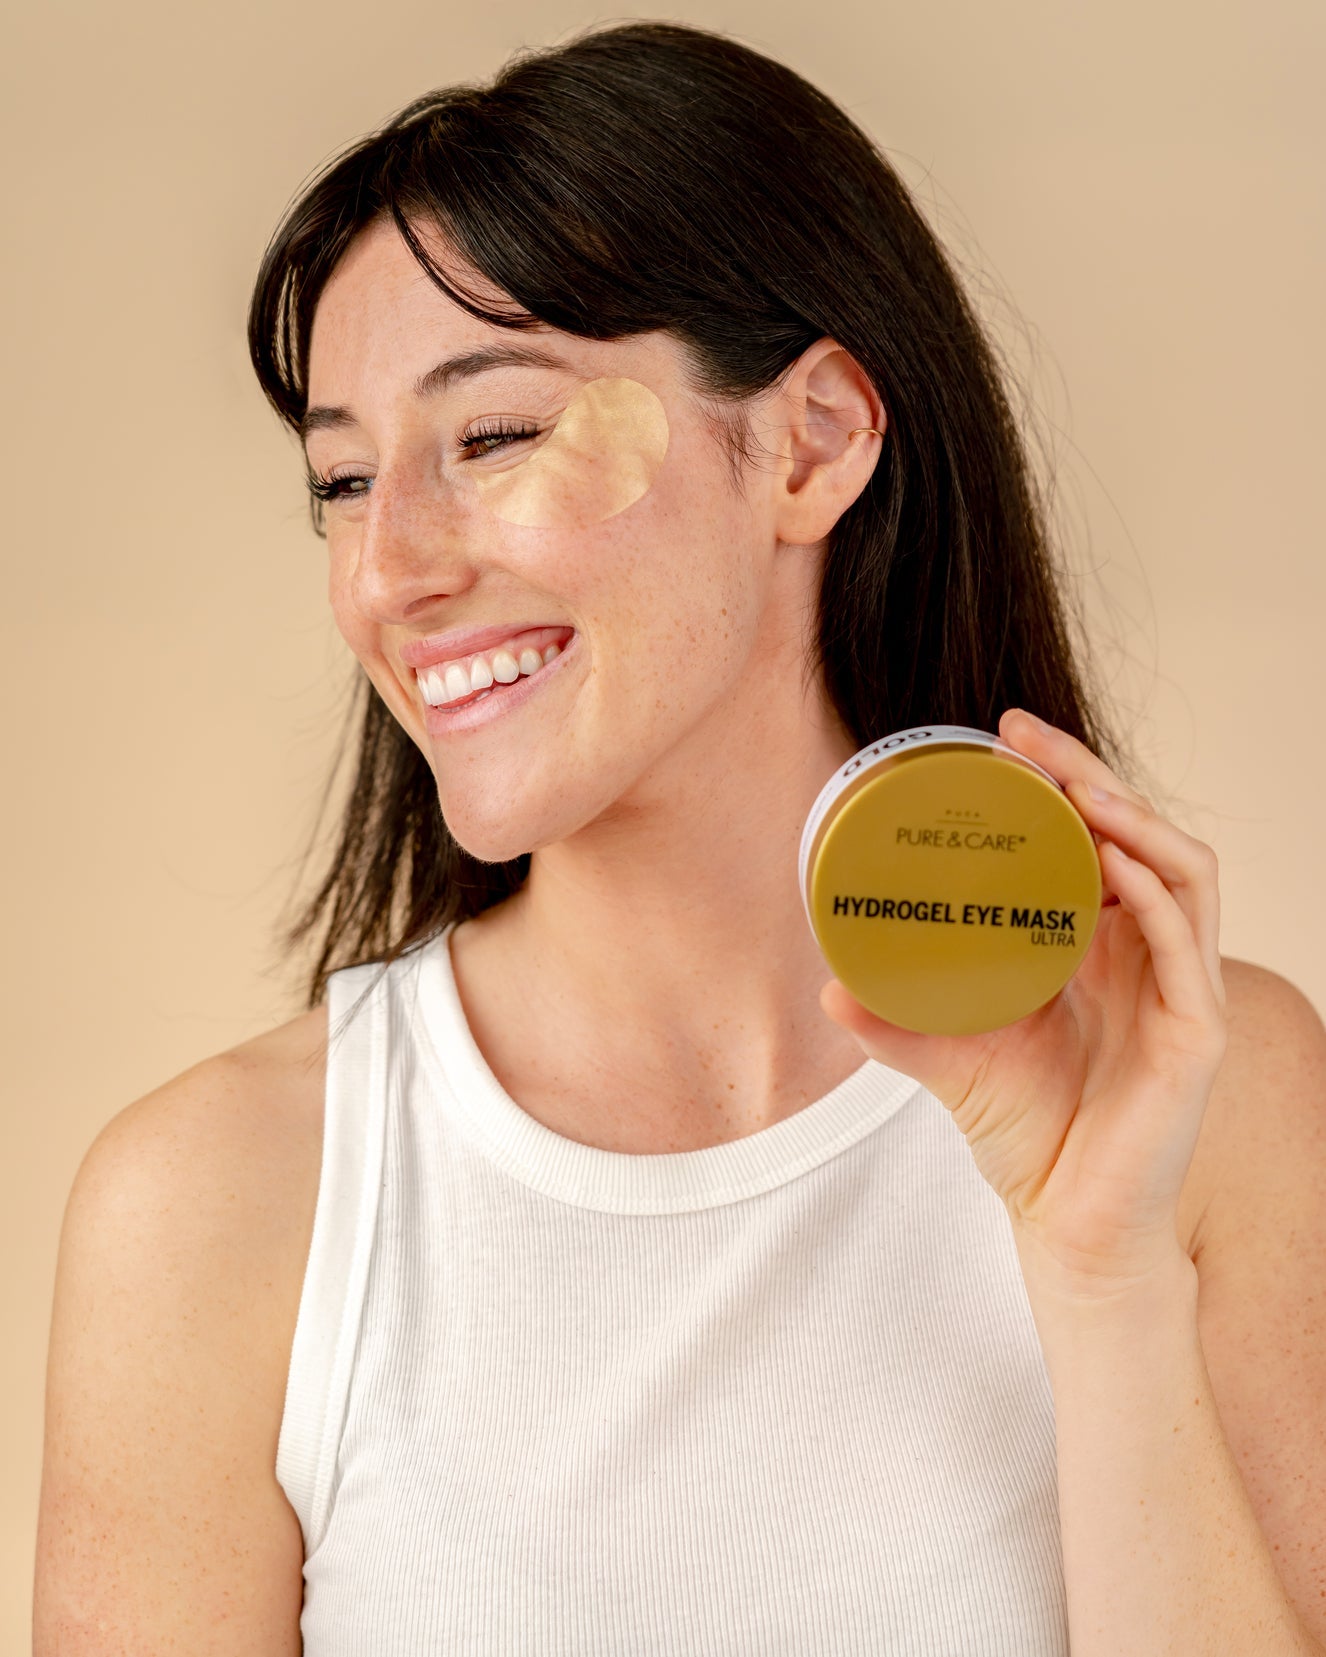 Hydrogel Eye Mask Ultra Gold | PUCA - PURE & CARE